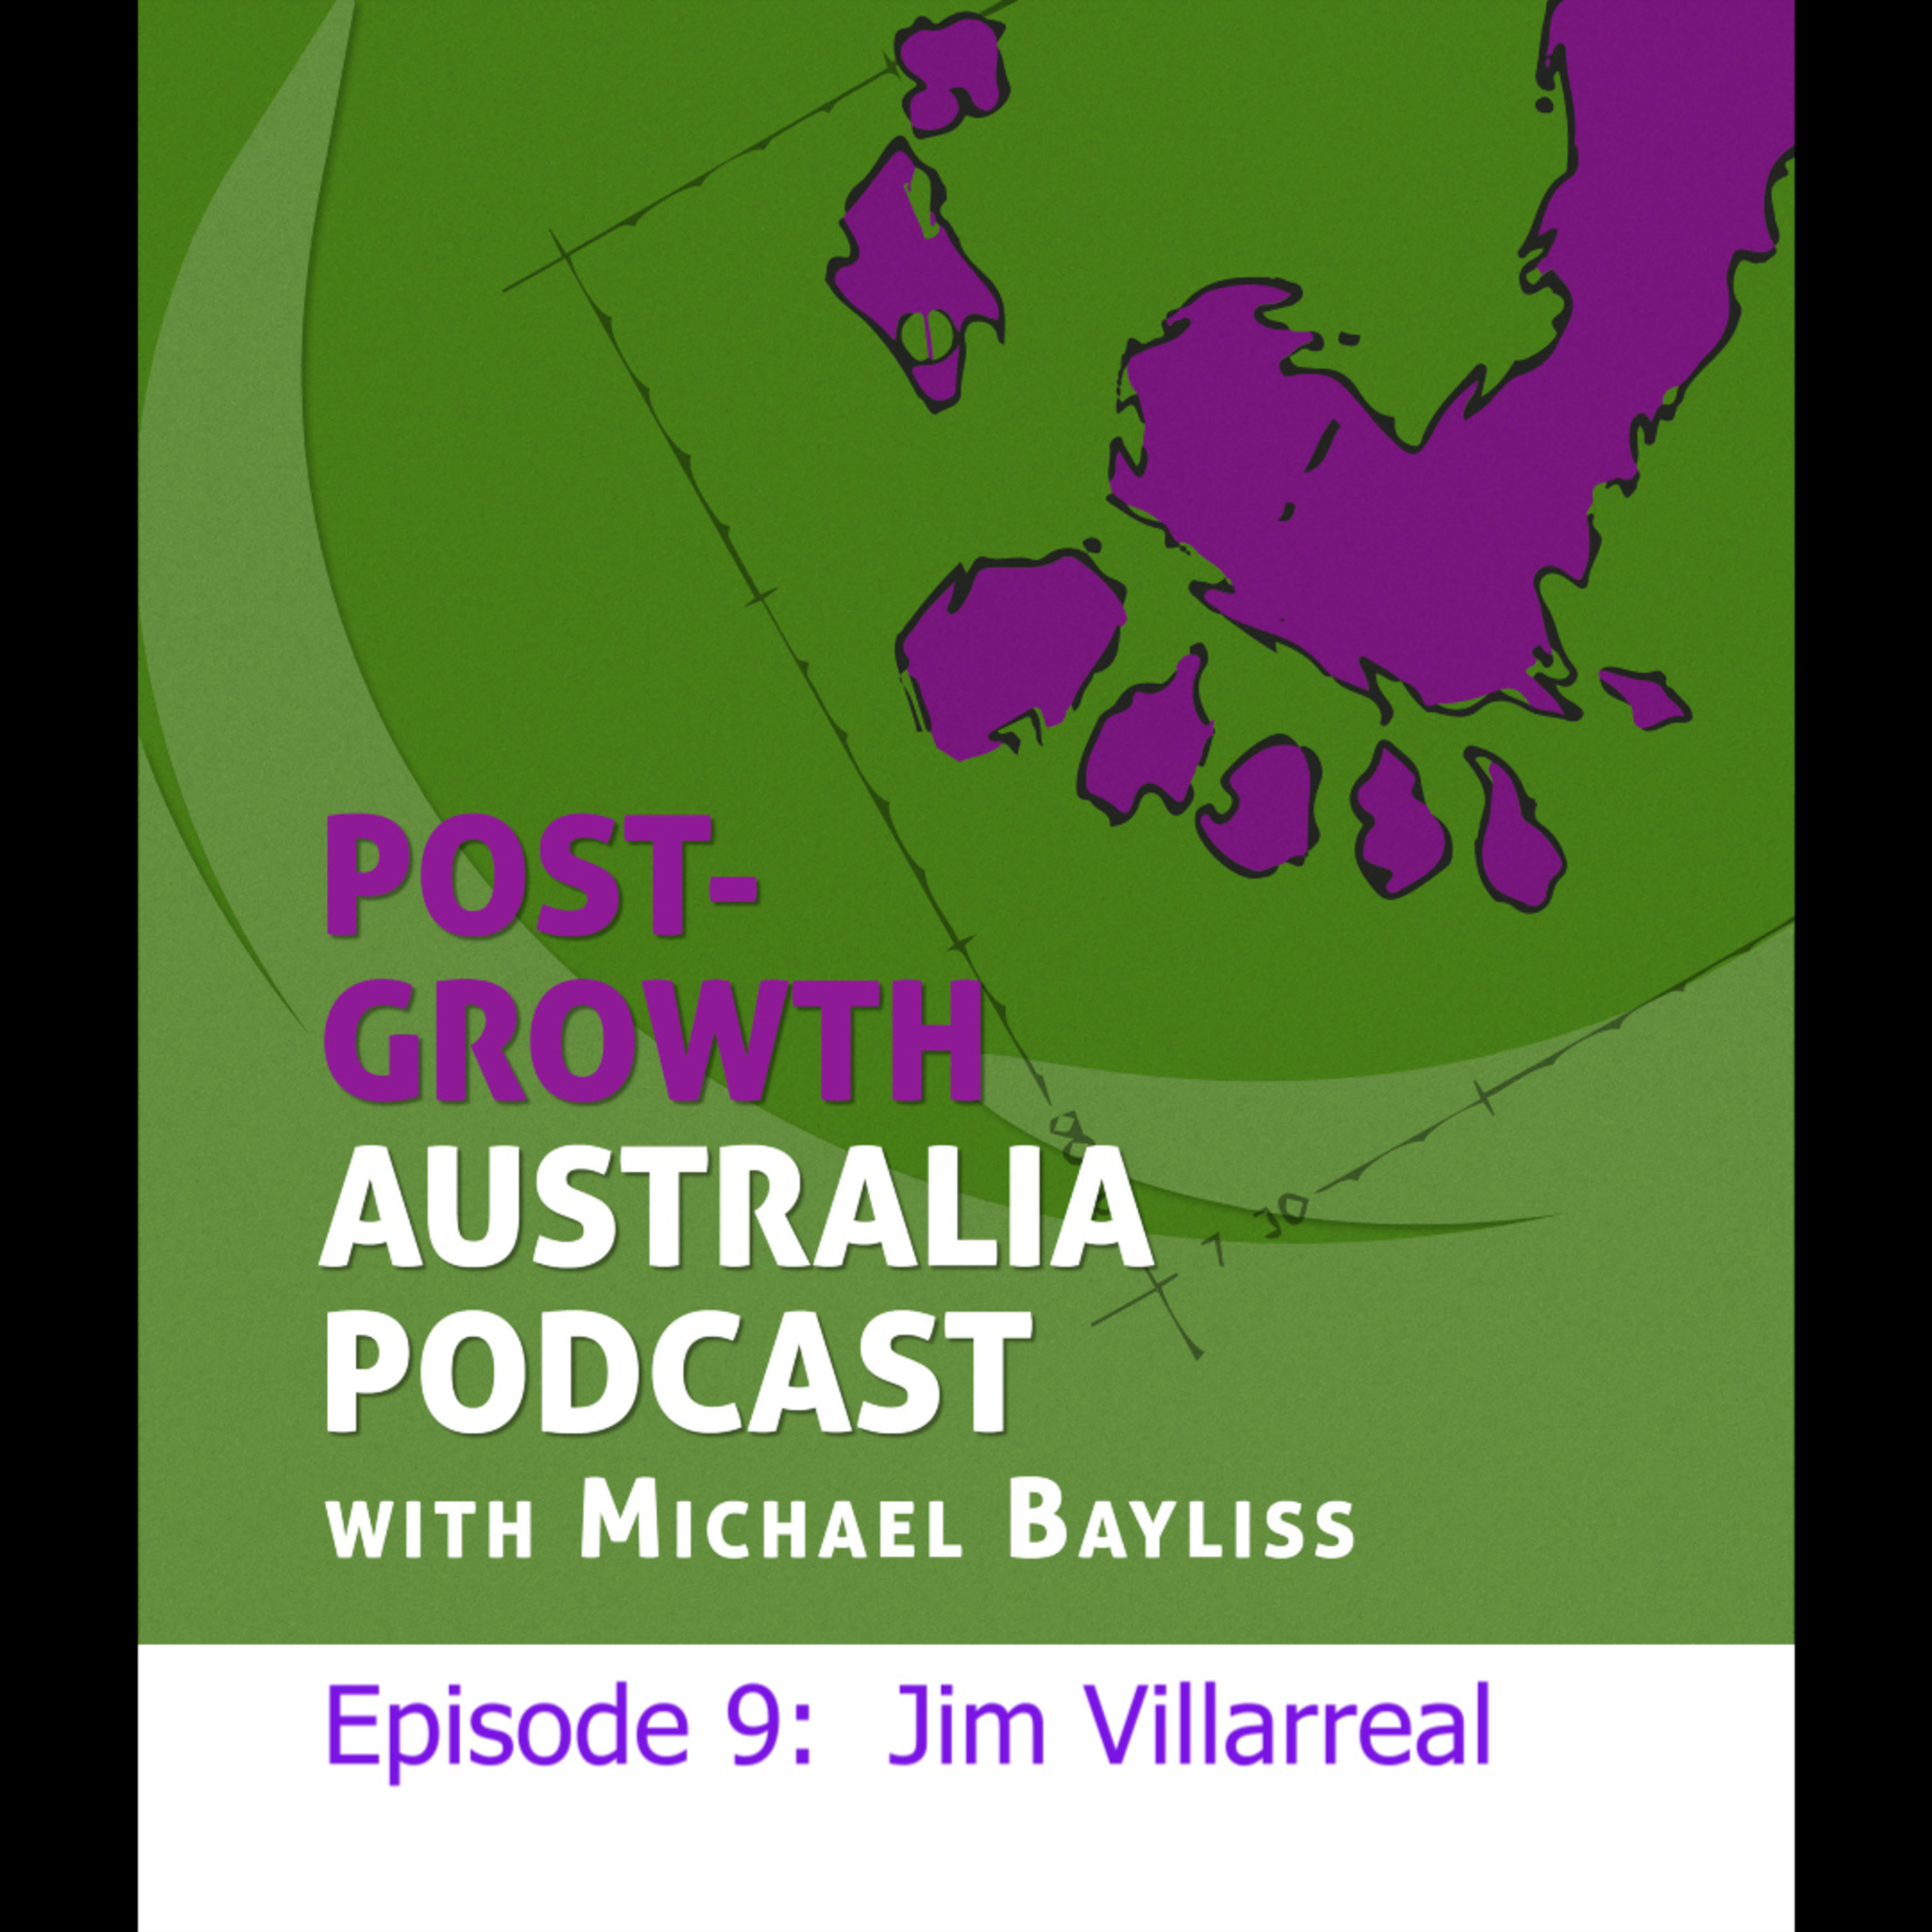 Episode 9:  Healing within to heal the world - with Jim Villarreal